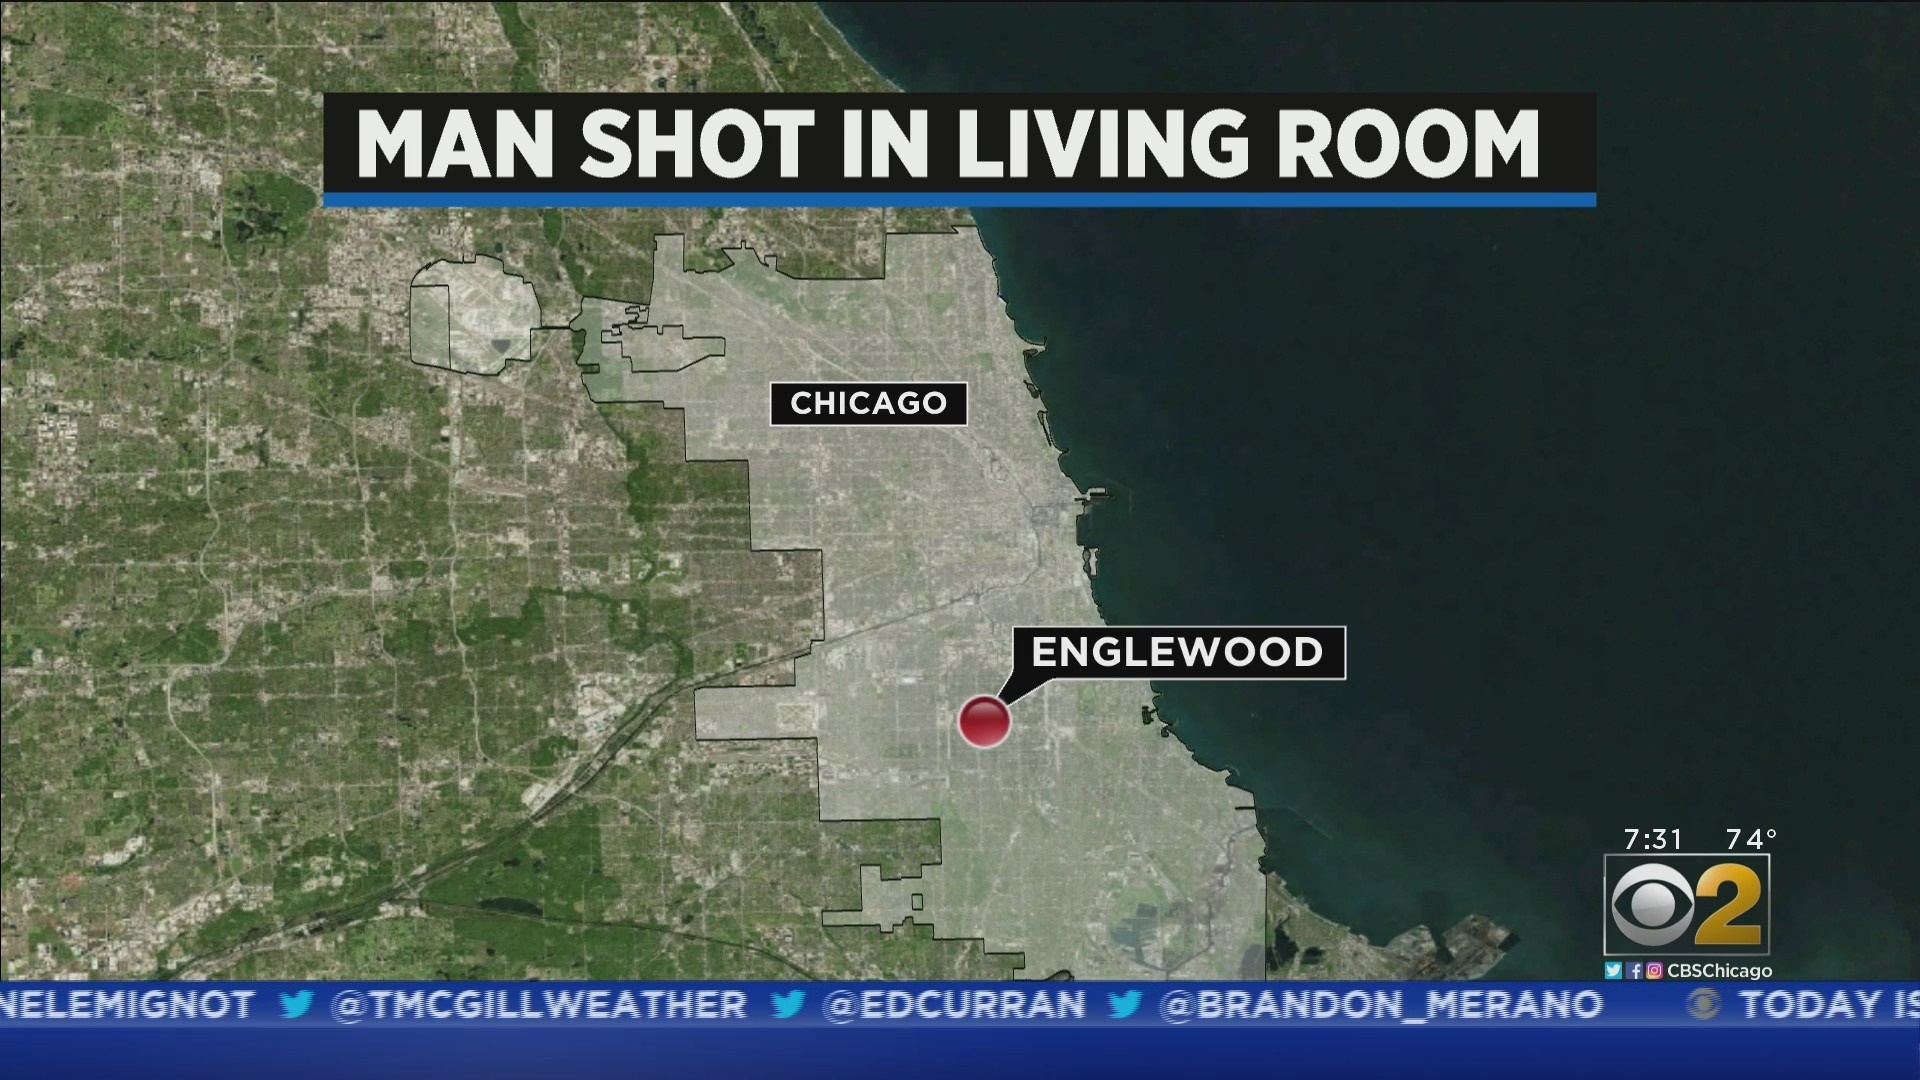 Man shot through window while in living room